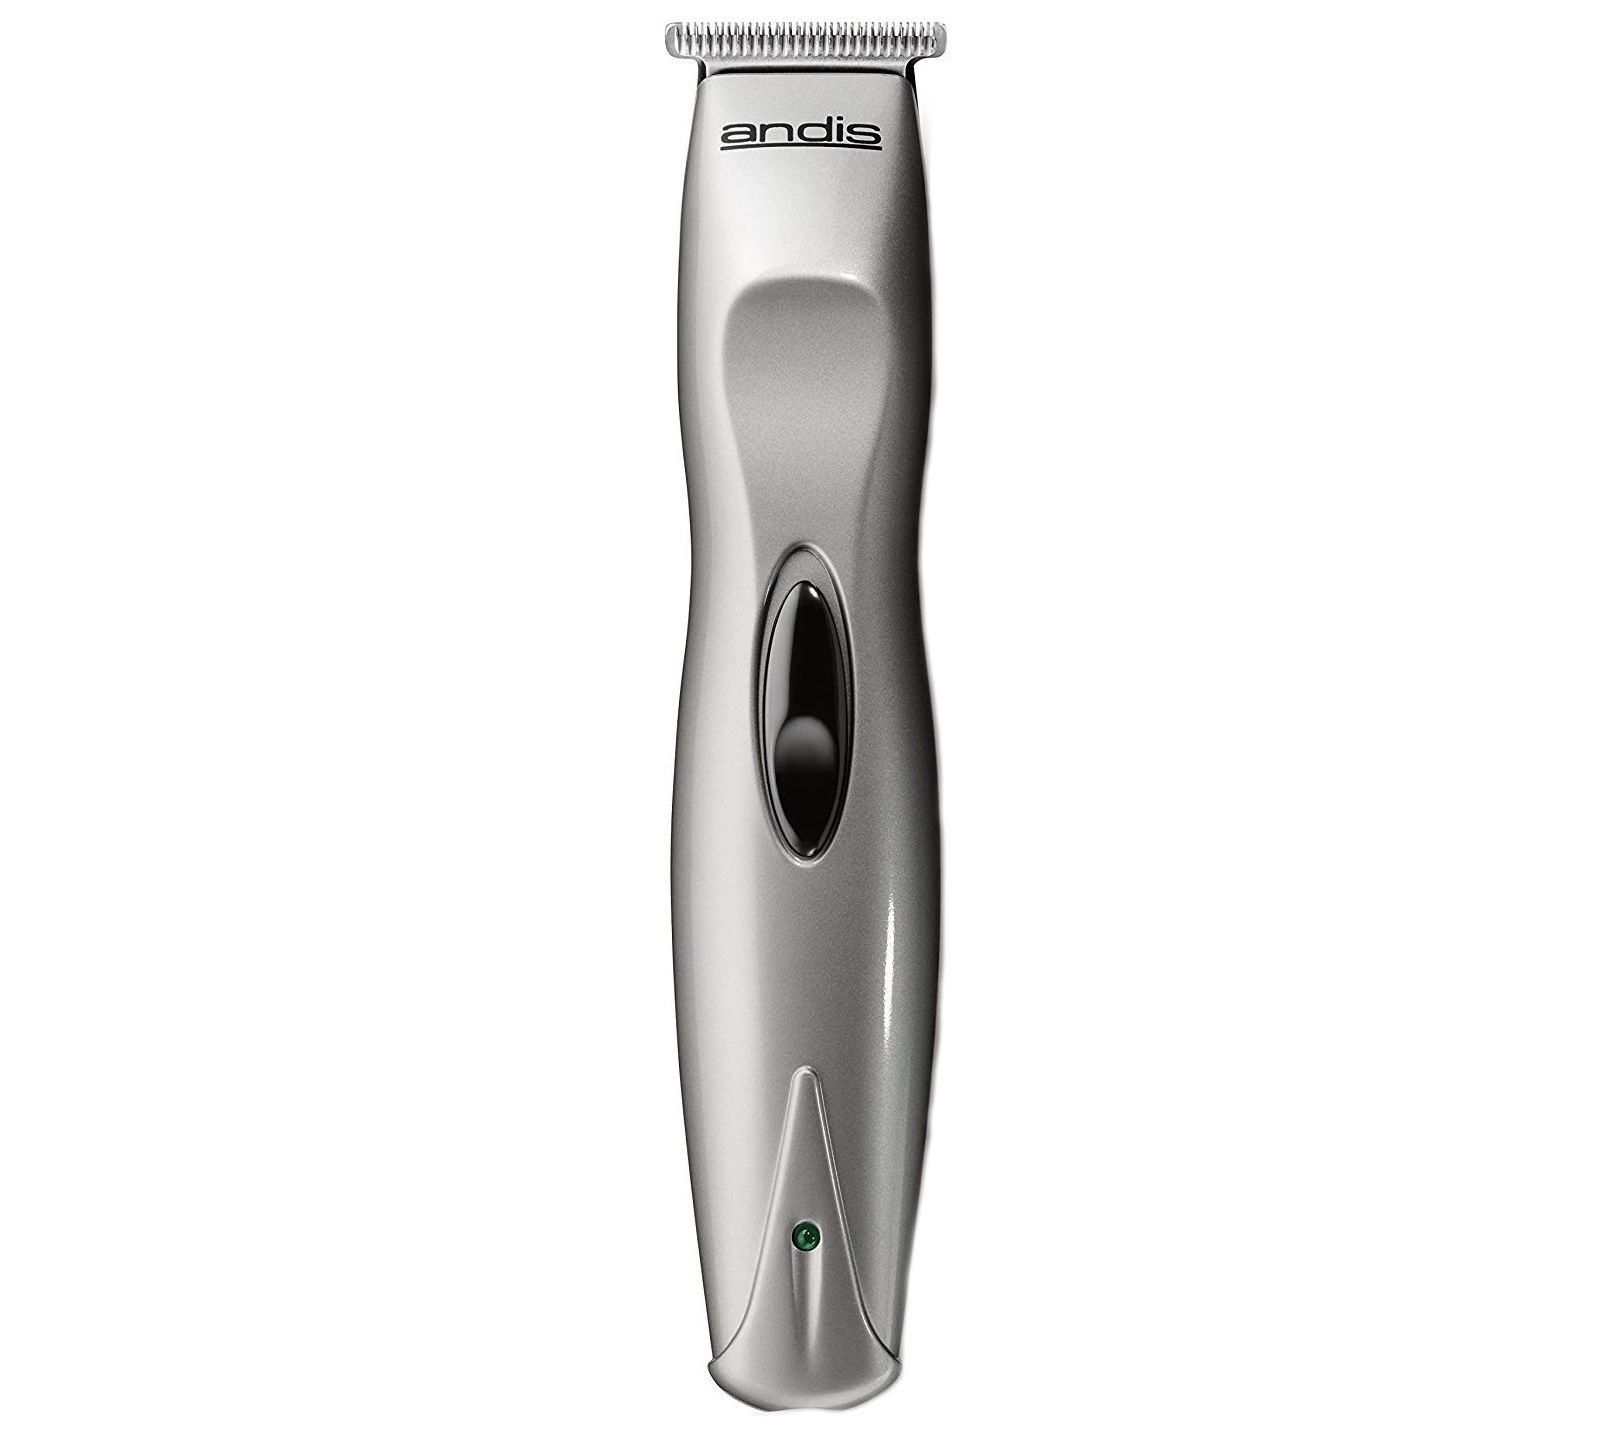 breville cordless clippers